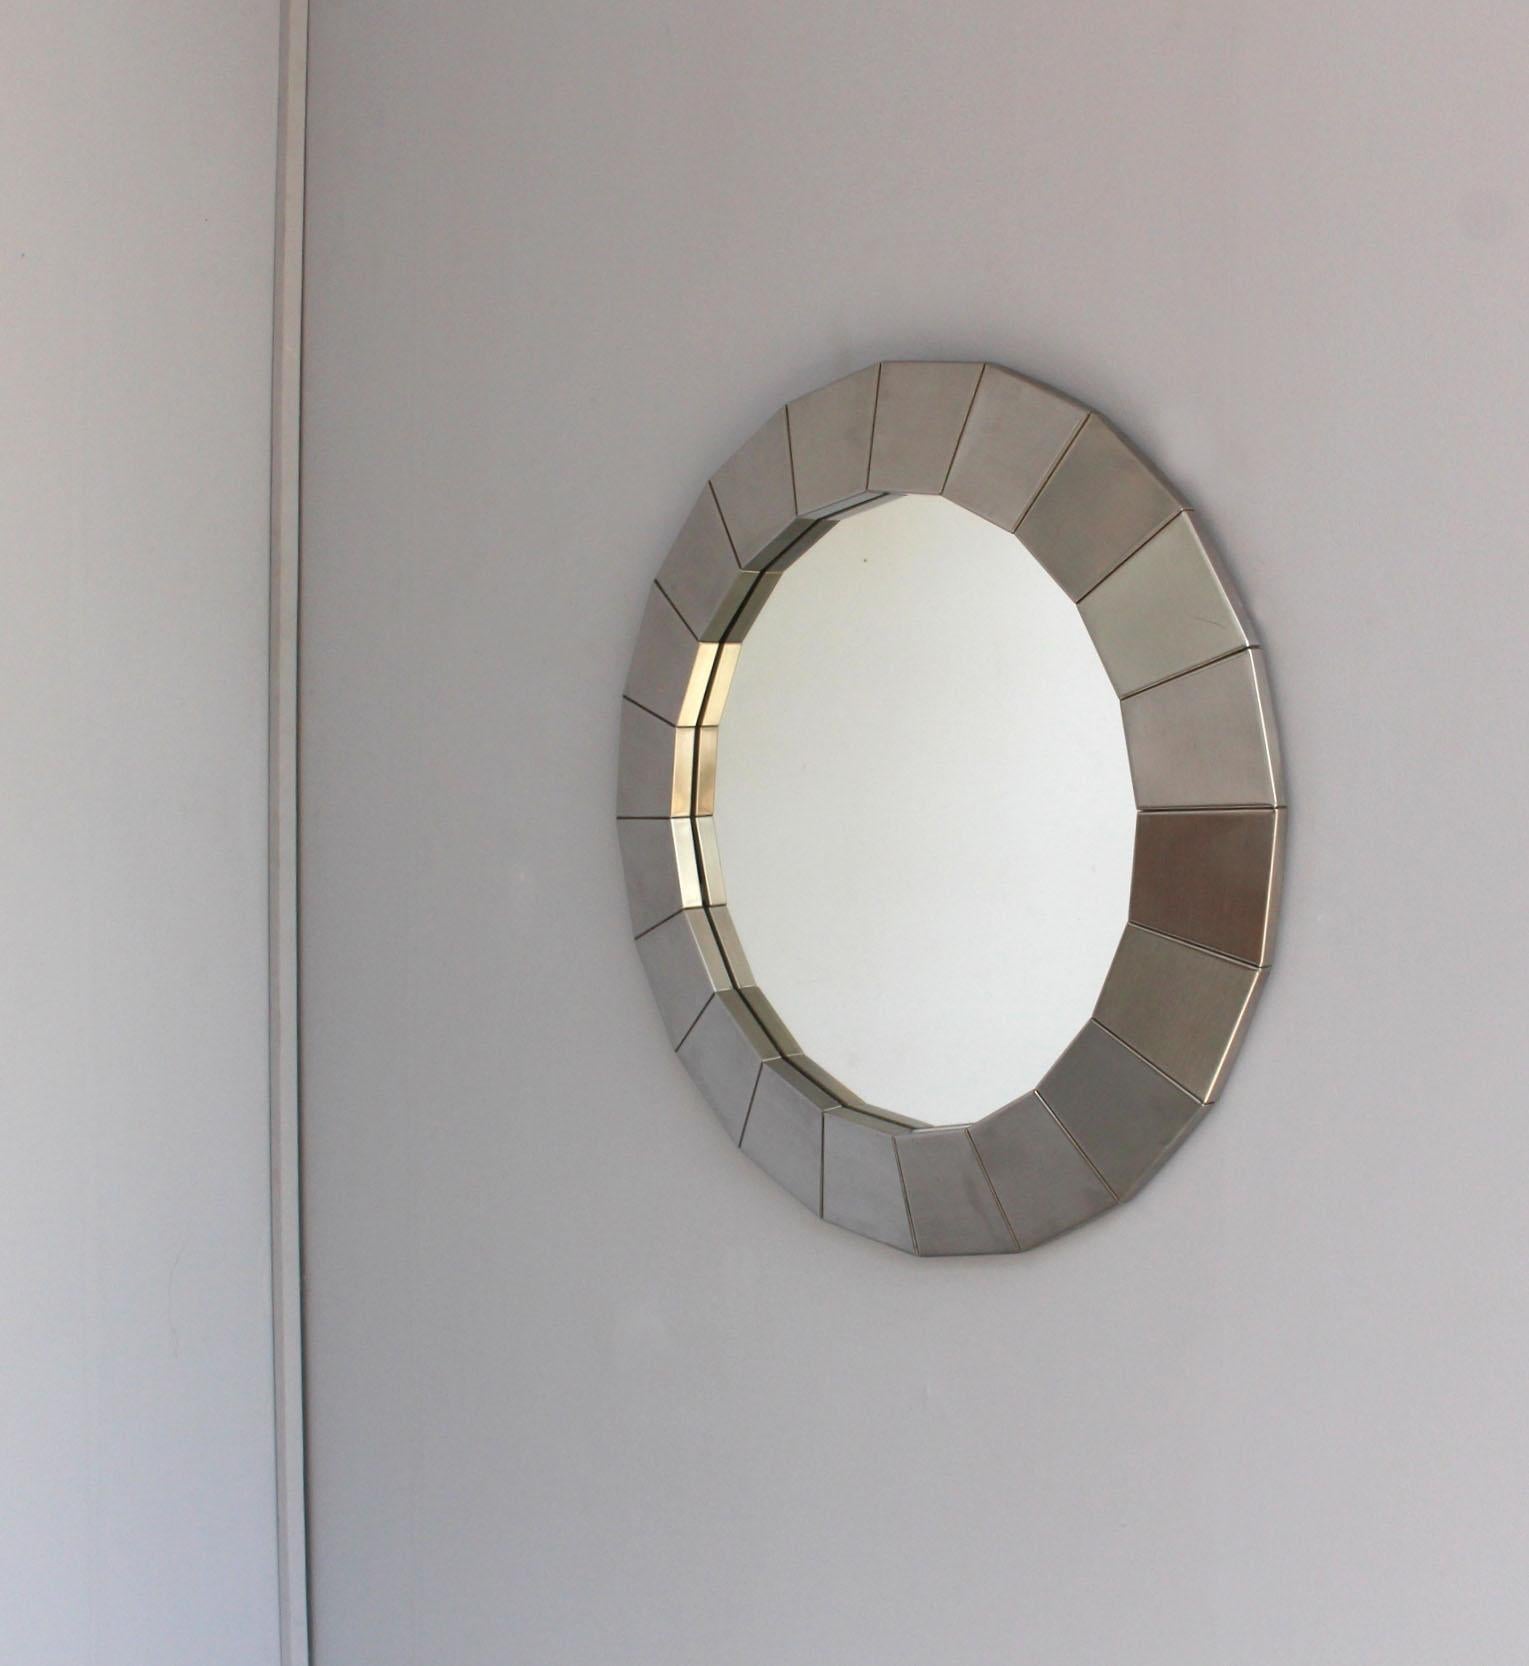 A fine French 1970s round faceted polished stainless steel framed mirror.